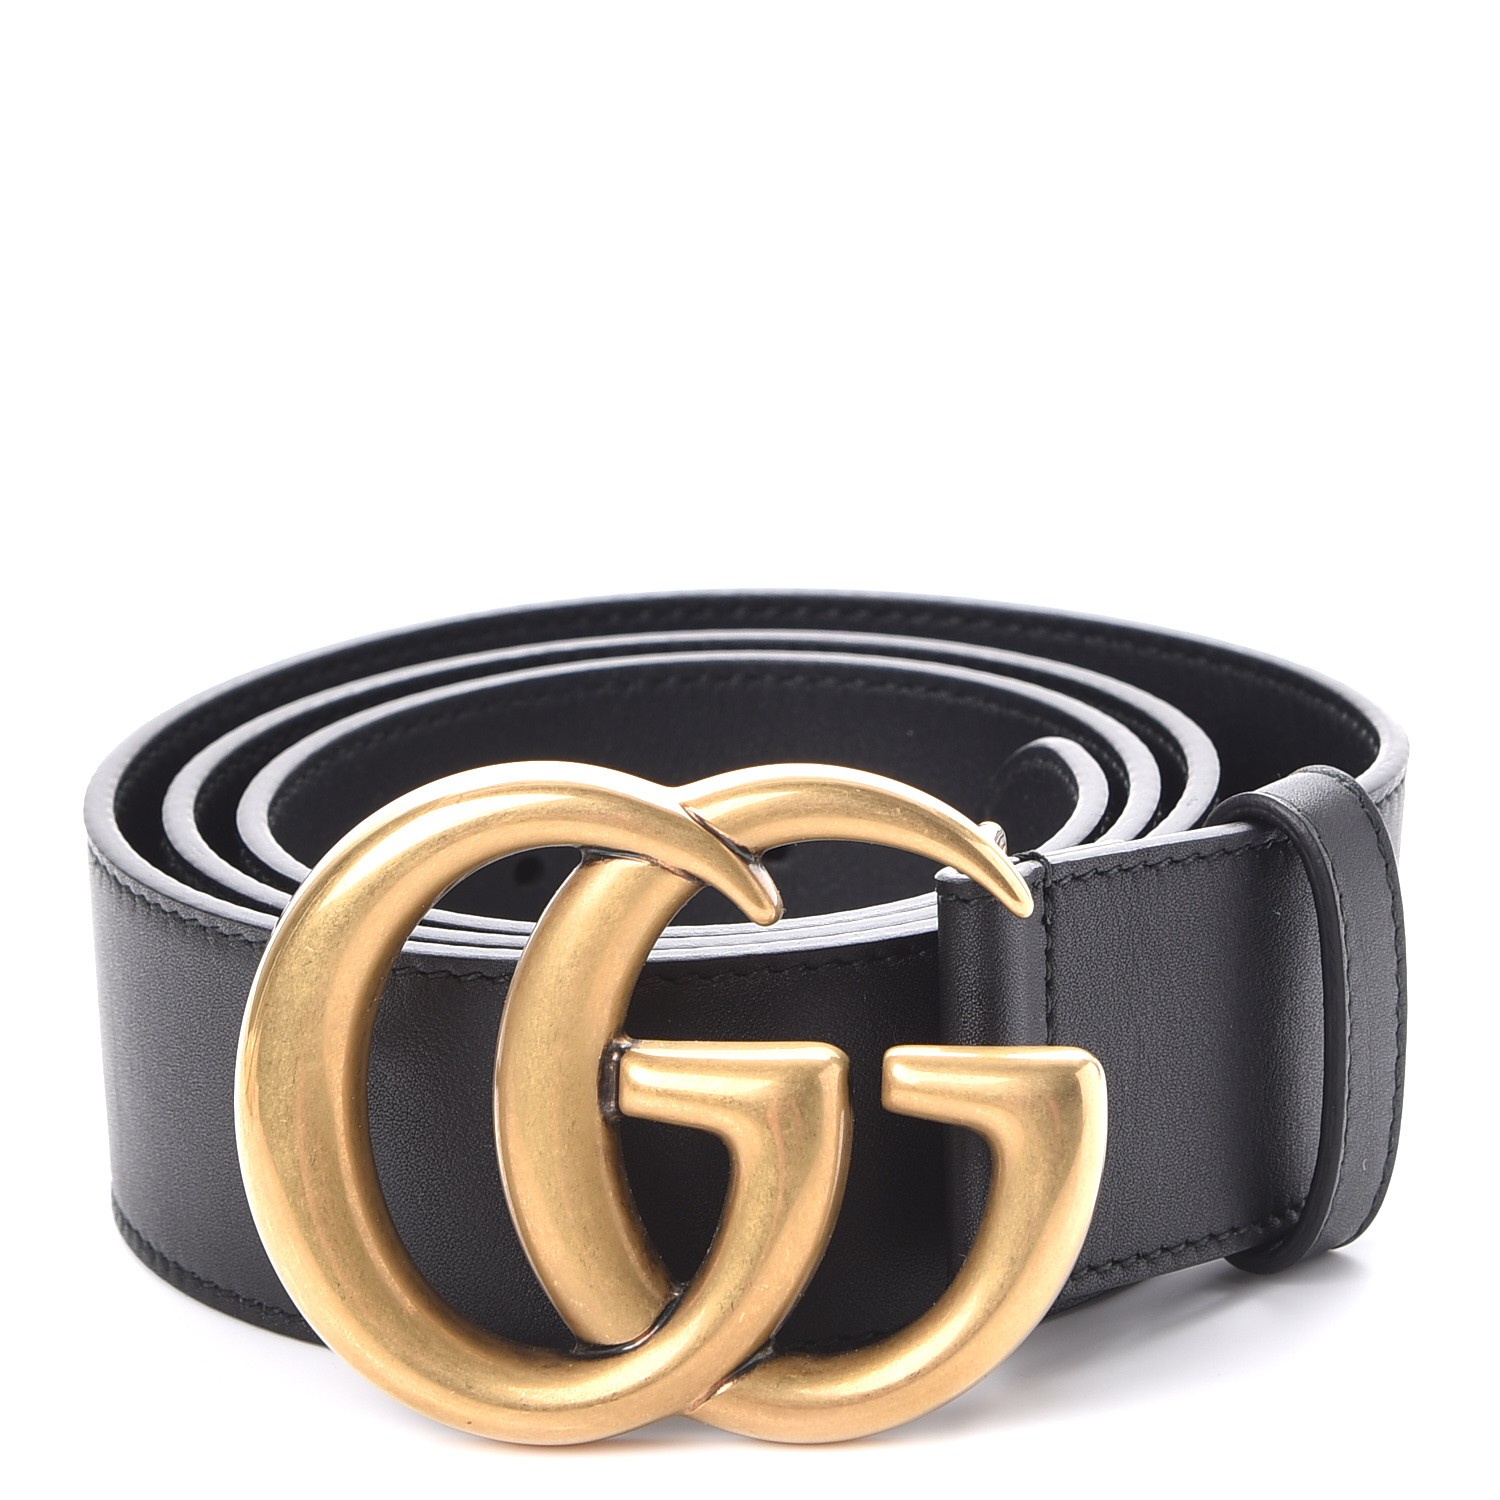 525040 gucci belt,Save up to 18%,www.ilcascinone.com